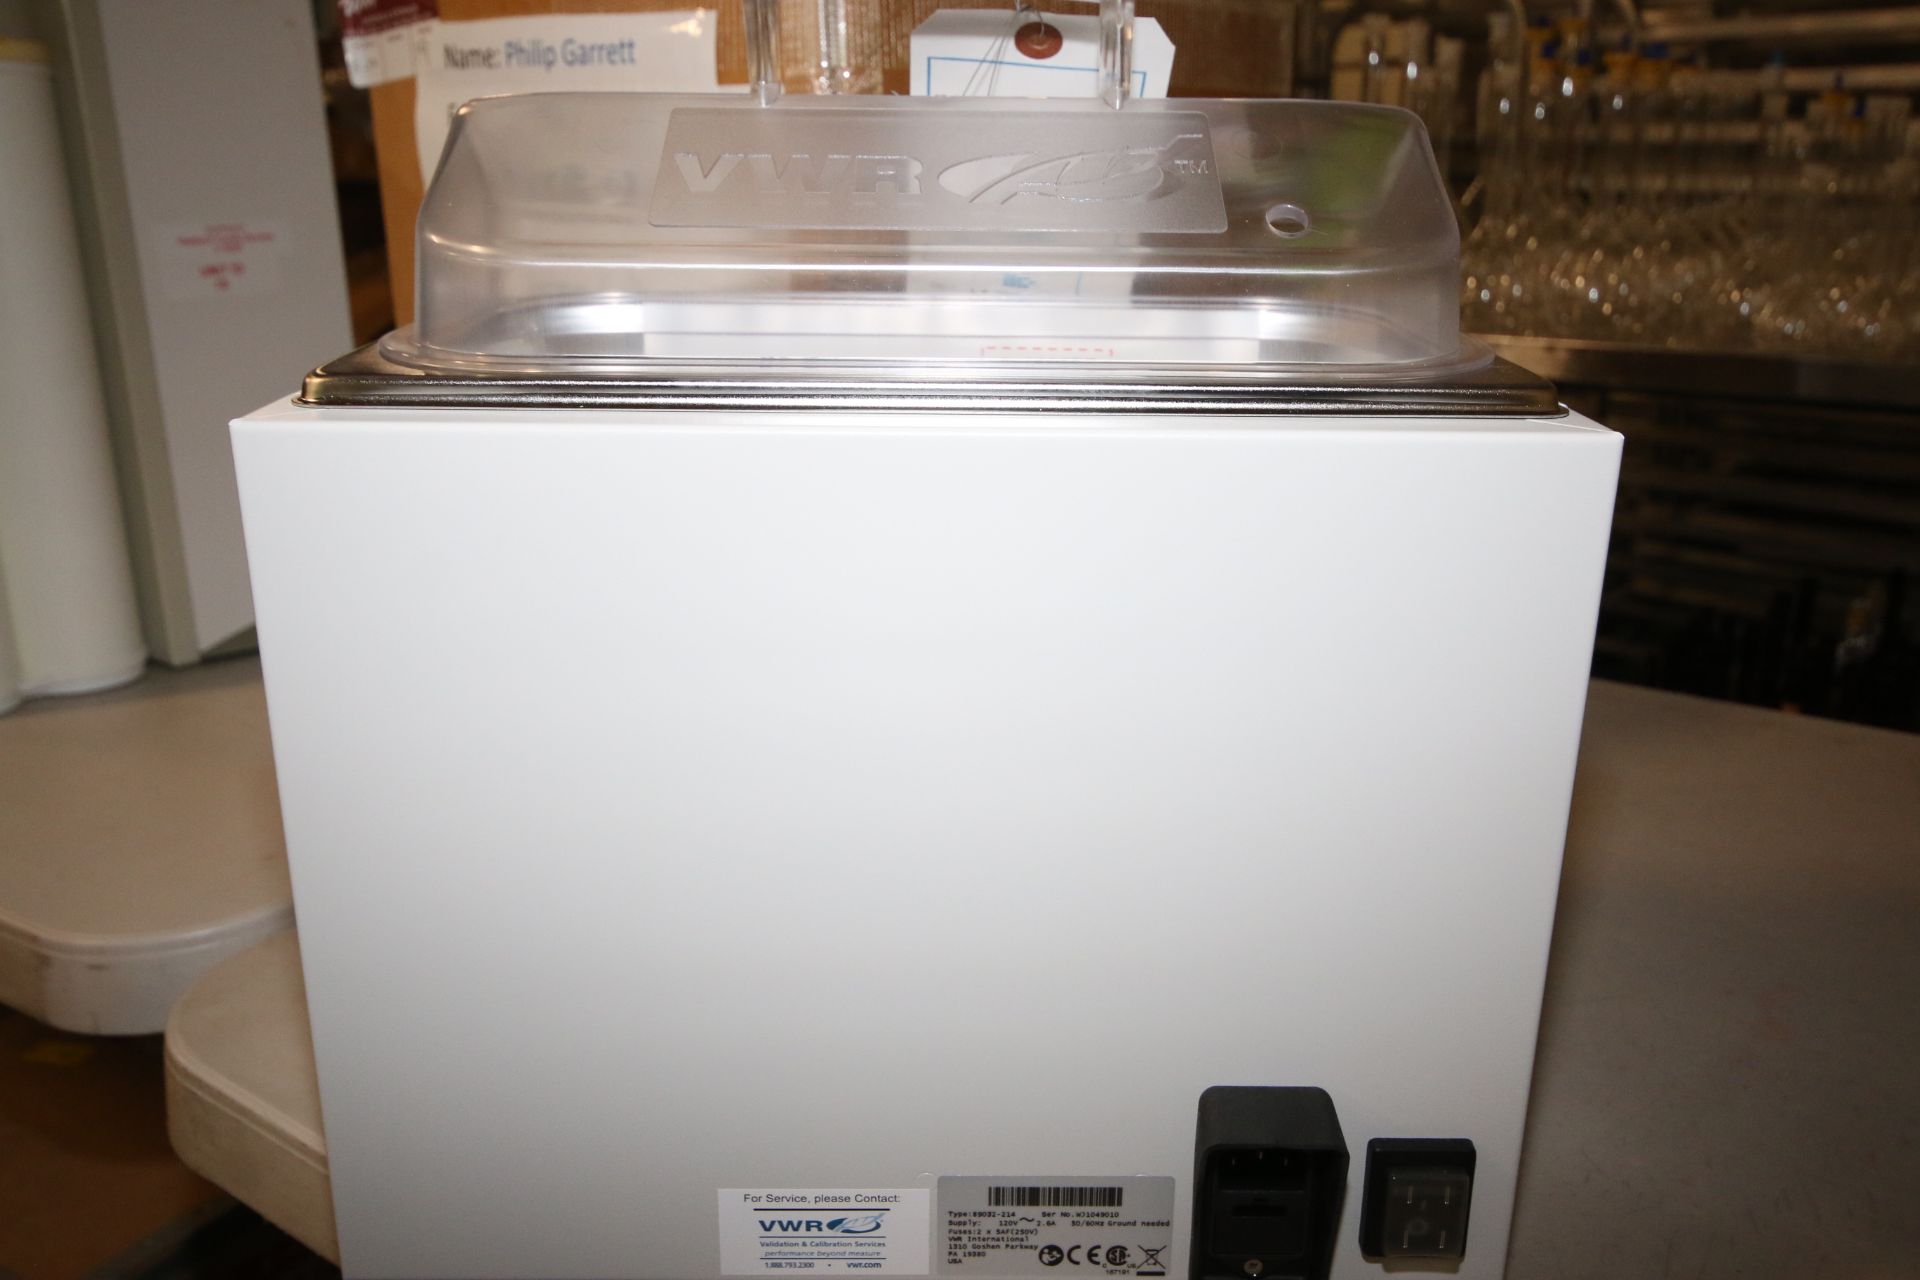 NEW VWR Unstirred S/S Water Bath, Type 89032-214, S/N WJ1049010, 120 Volts, Internal Dims.: Aprox. - Image 4 of 5